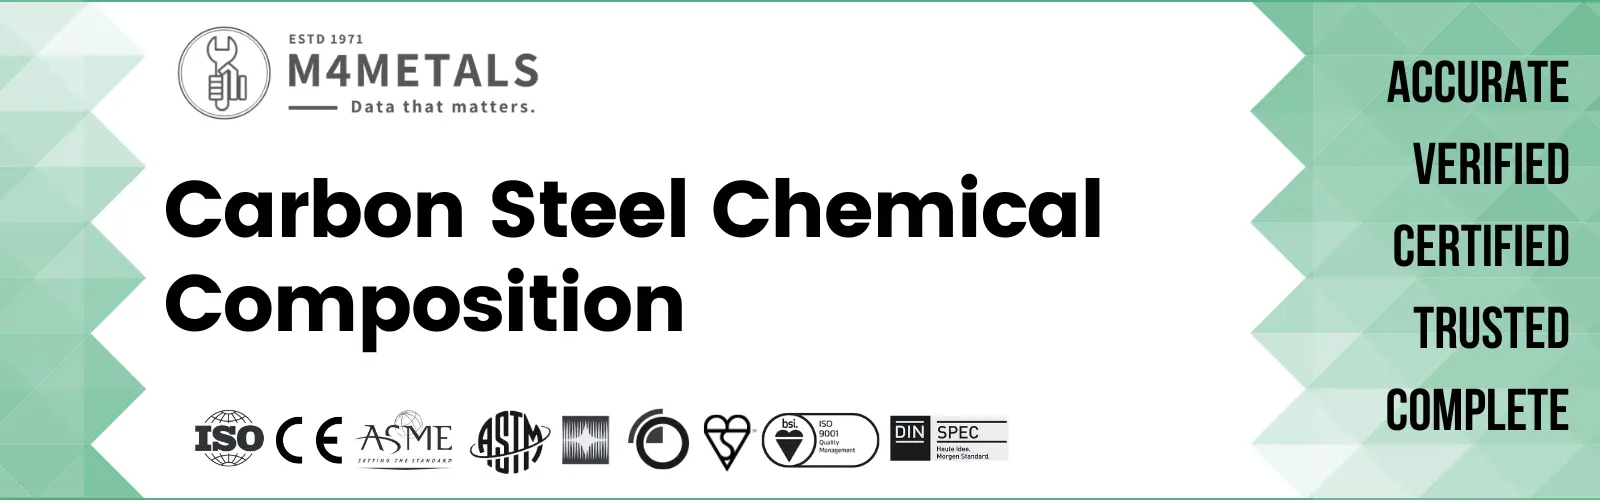 Carbon Steel Chemical Composition